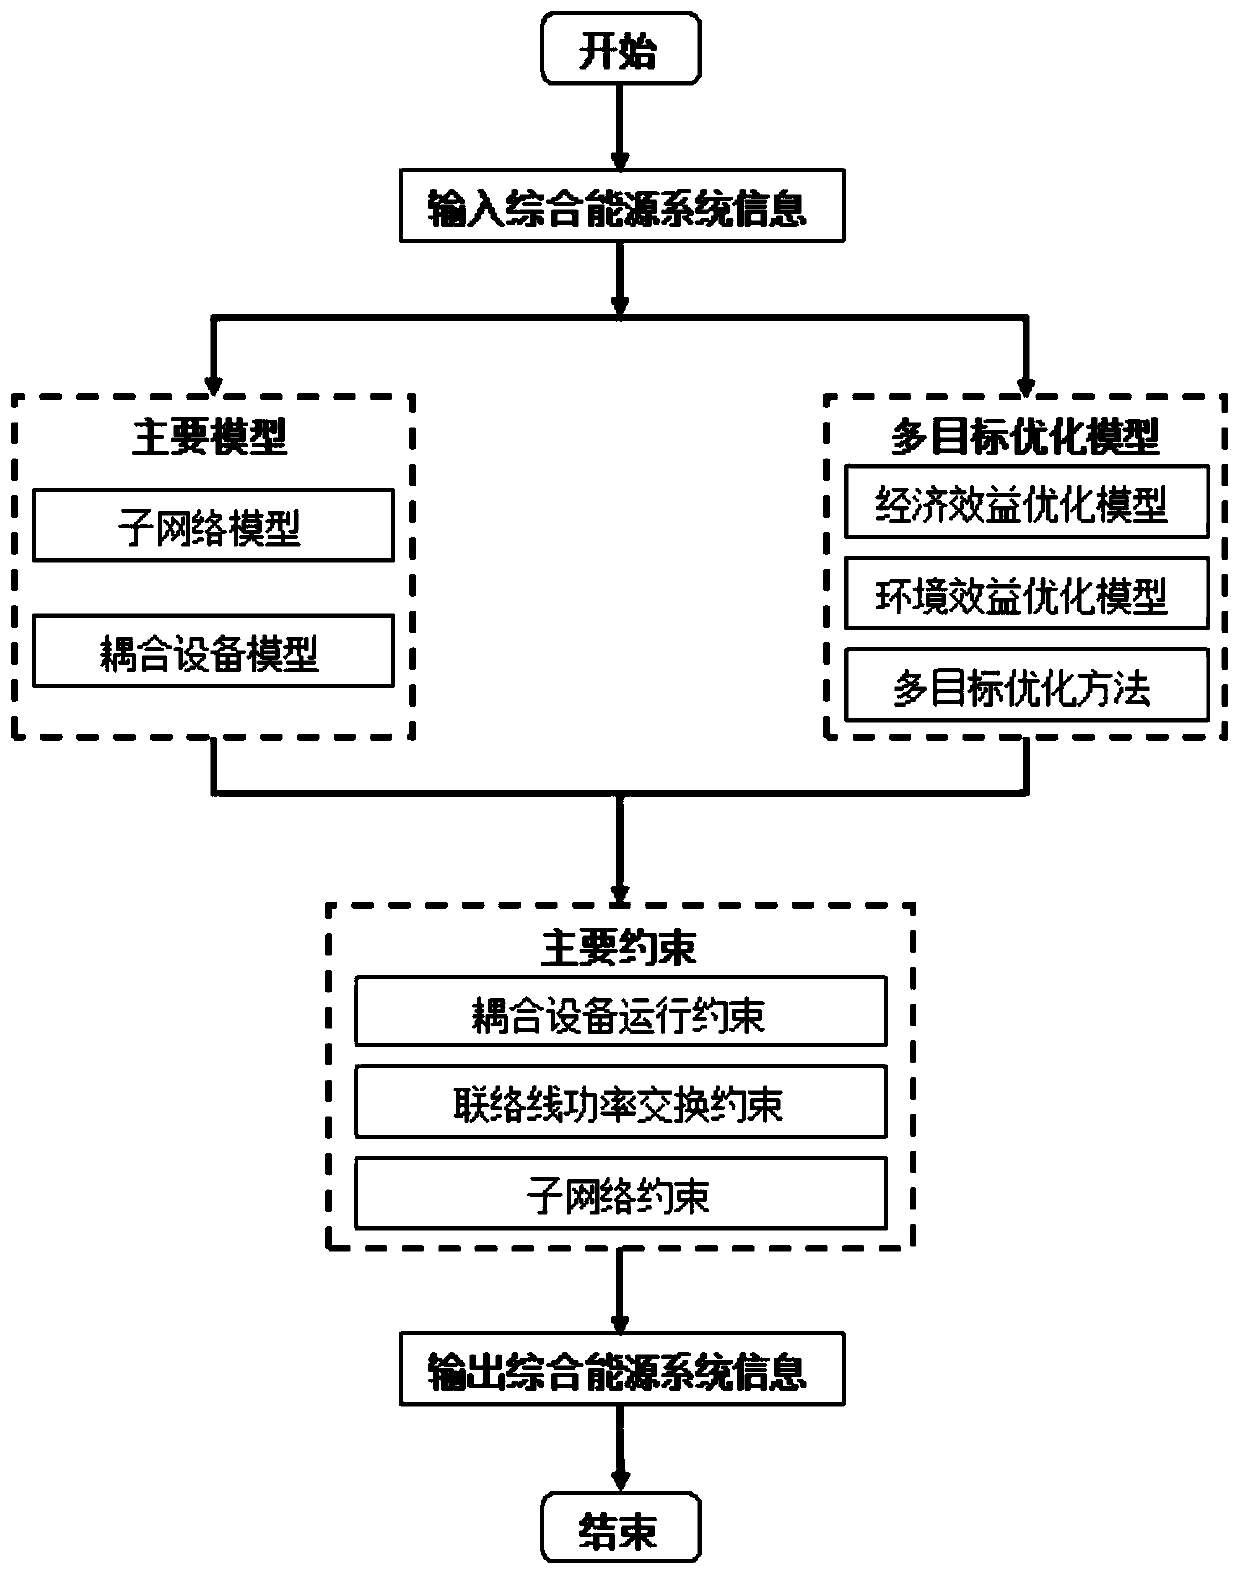 Comprehensive energy system multi-objective operation optimization method considering electric heating gas network